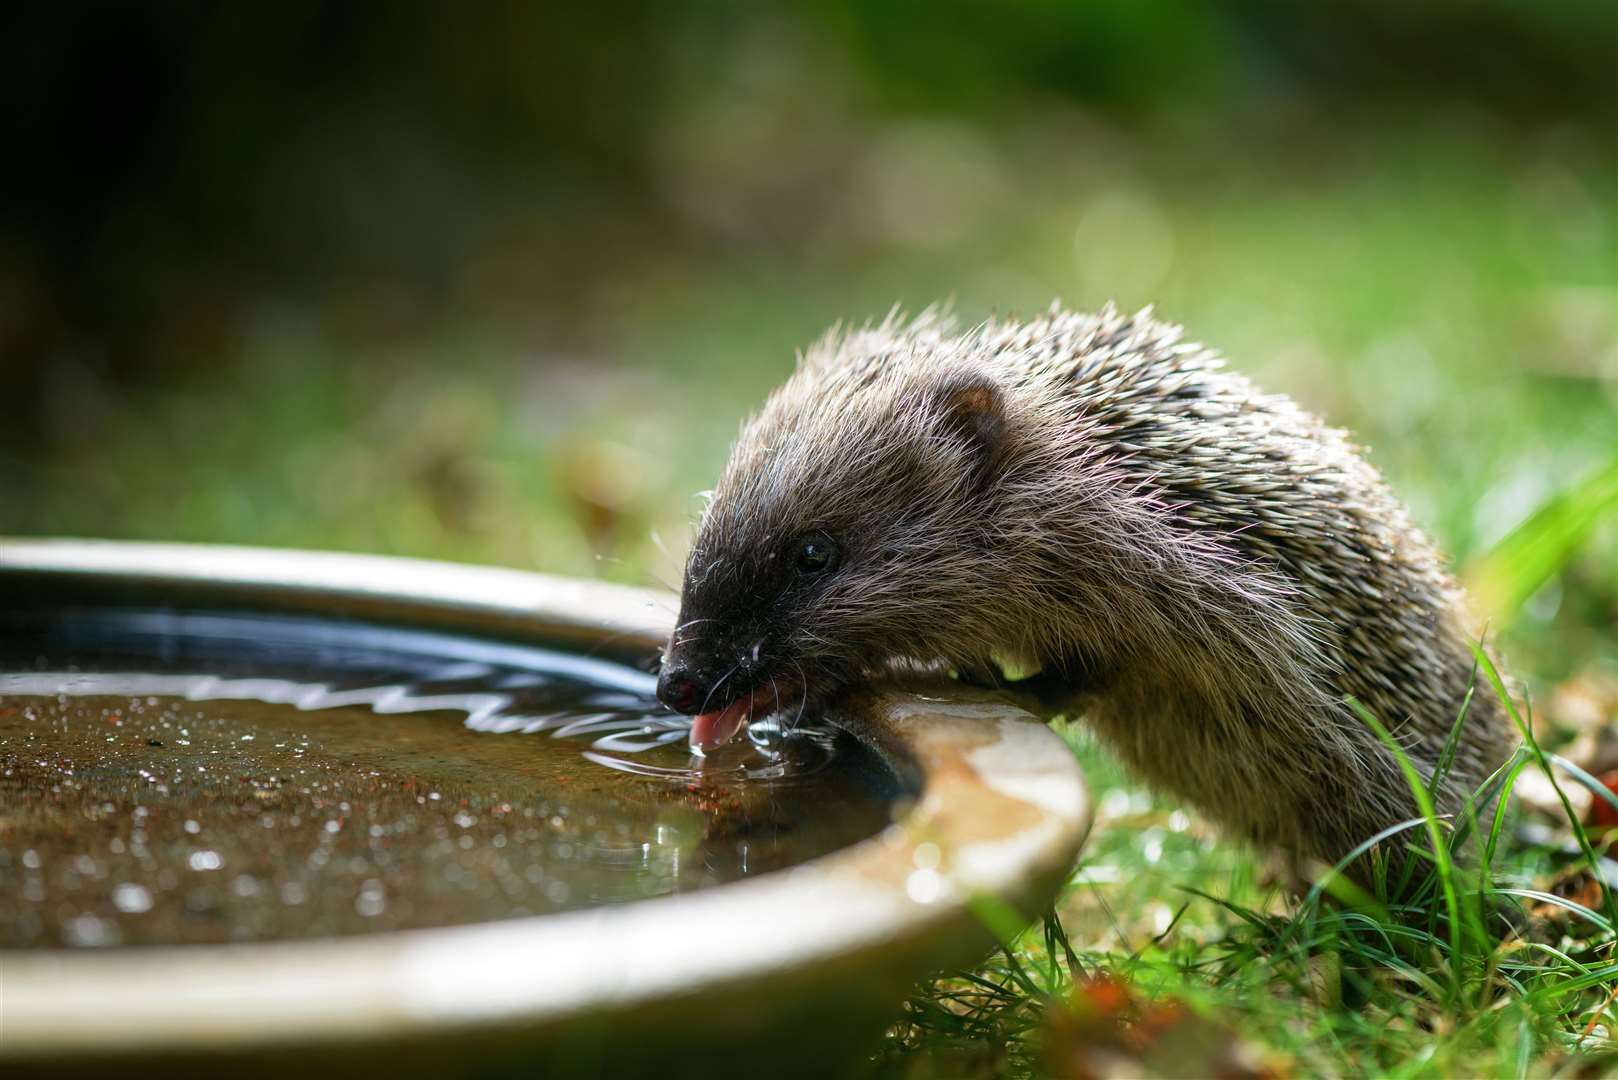 Young hedgehog drinks from a water bowl in the garden.